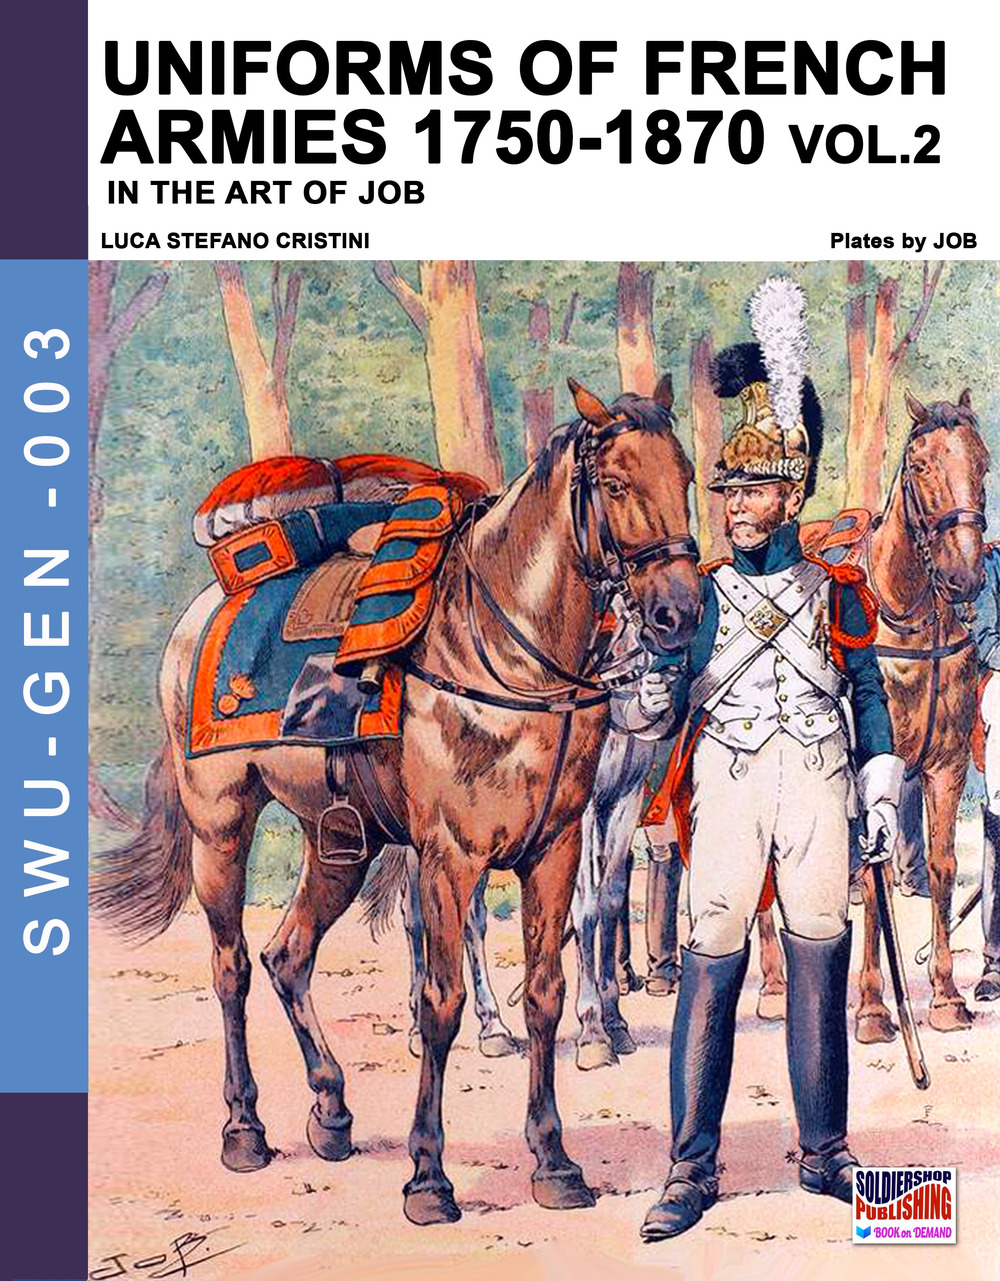 Uniforms of French army 1750-1870. Vol. 2